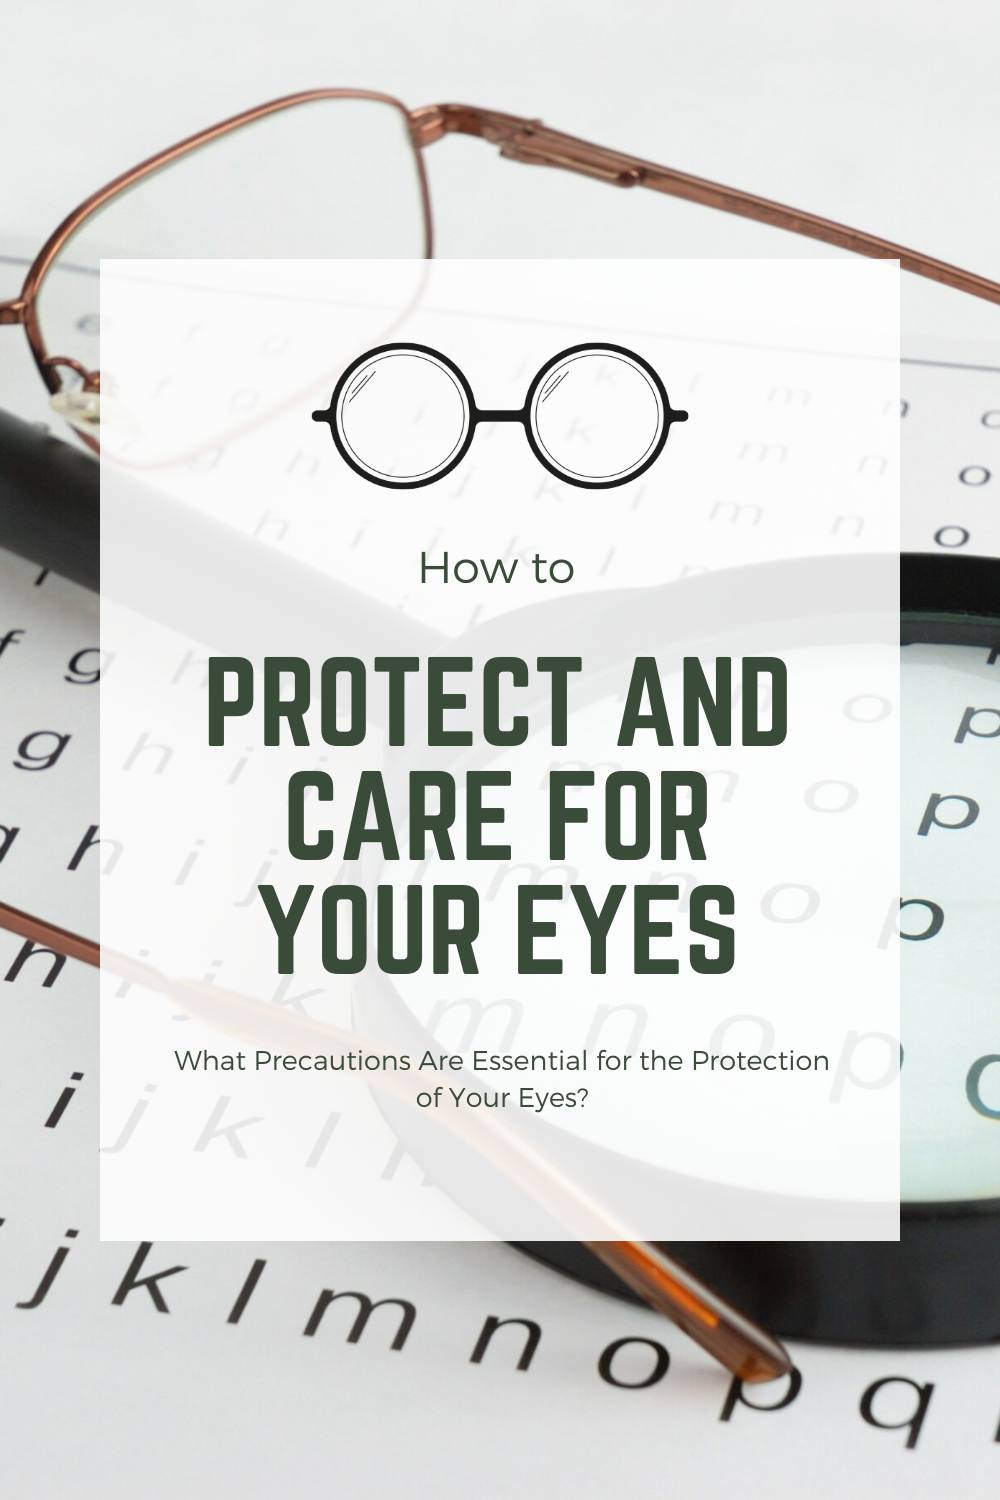 How to Protect and Care for Your Eyes